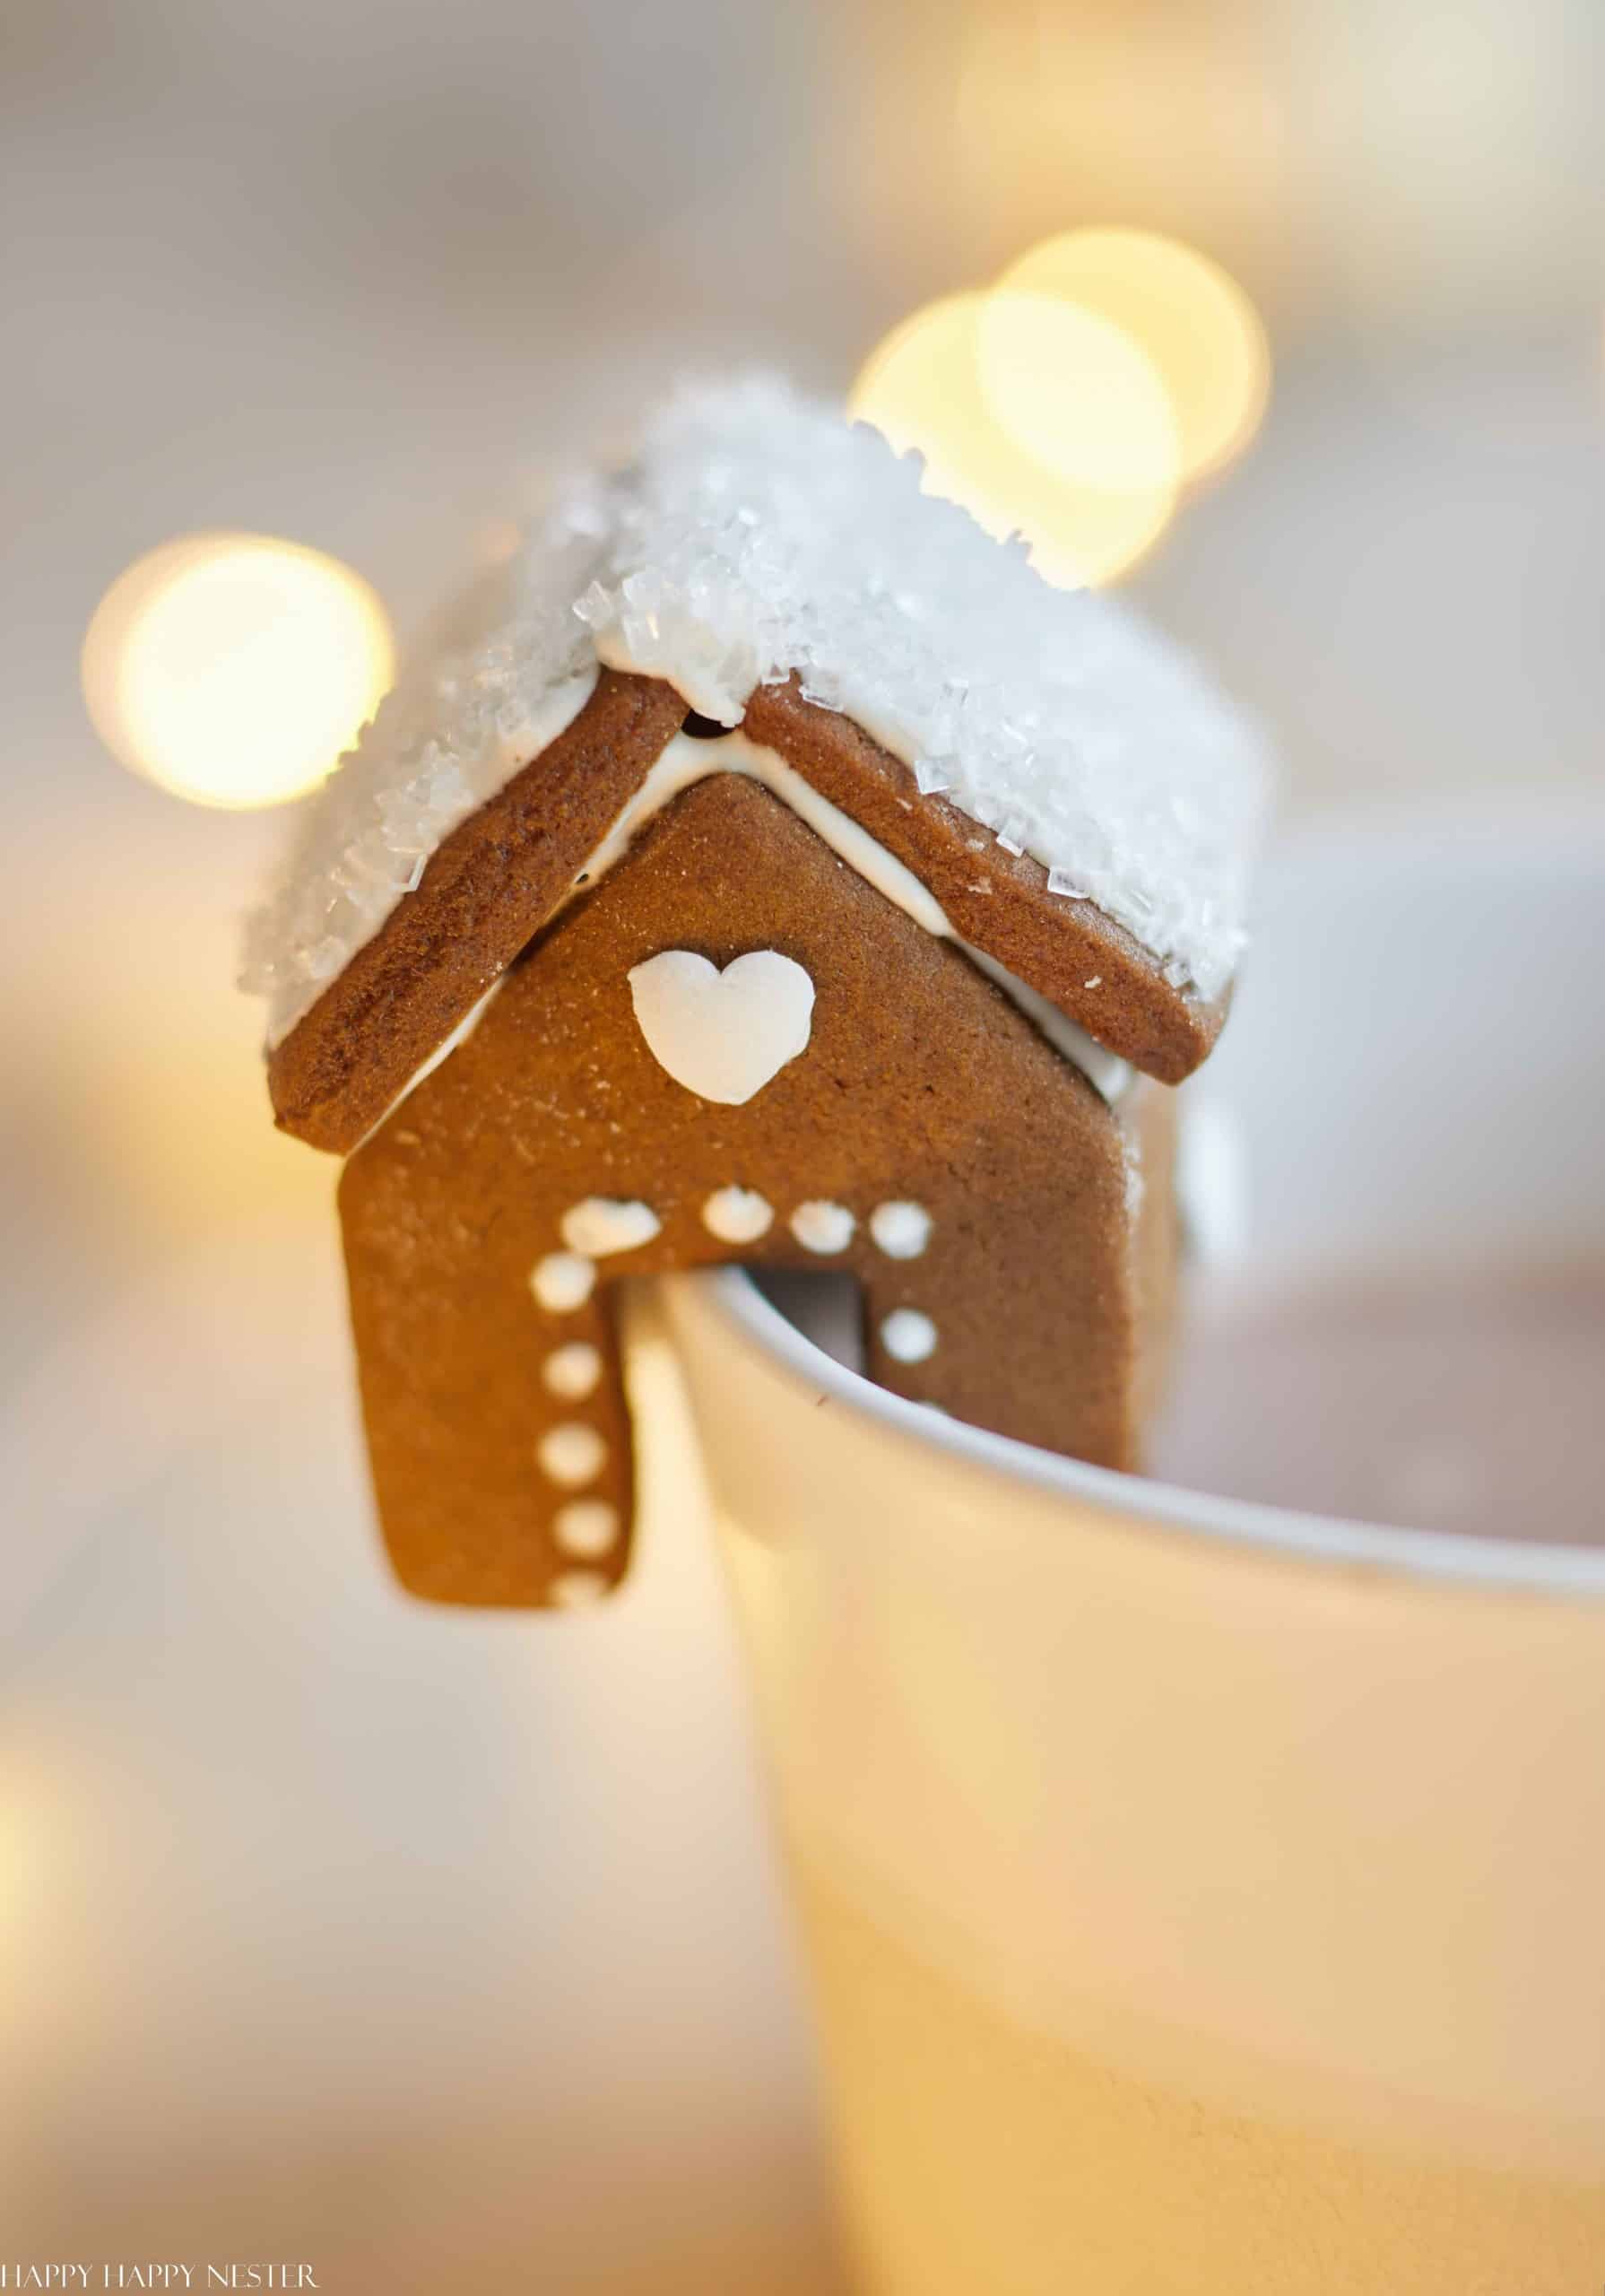 https://happyhappynester.com/wp-content/uploads/2022/10/gingerbread-house-recipe-scaled.jpg